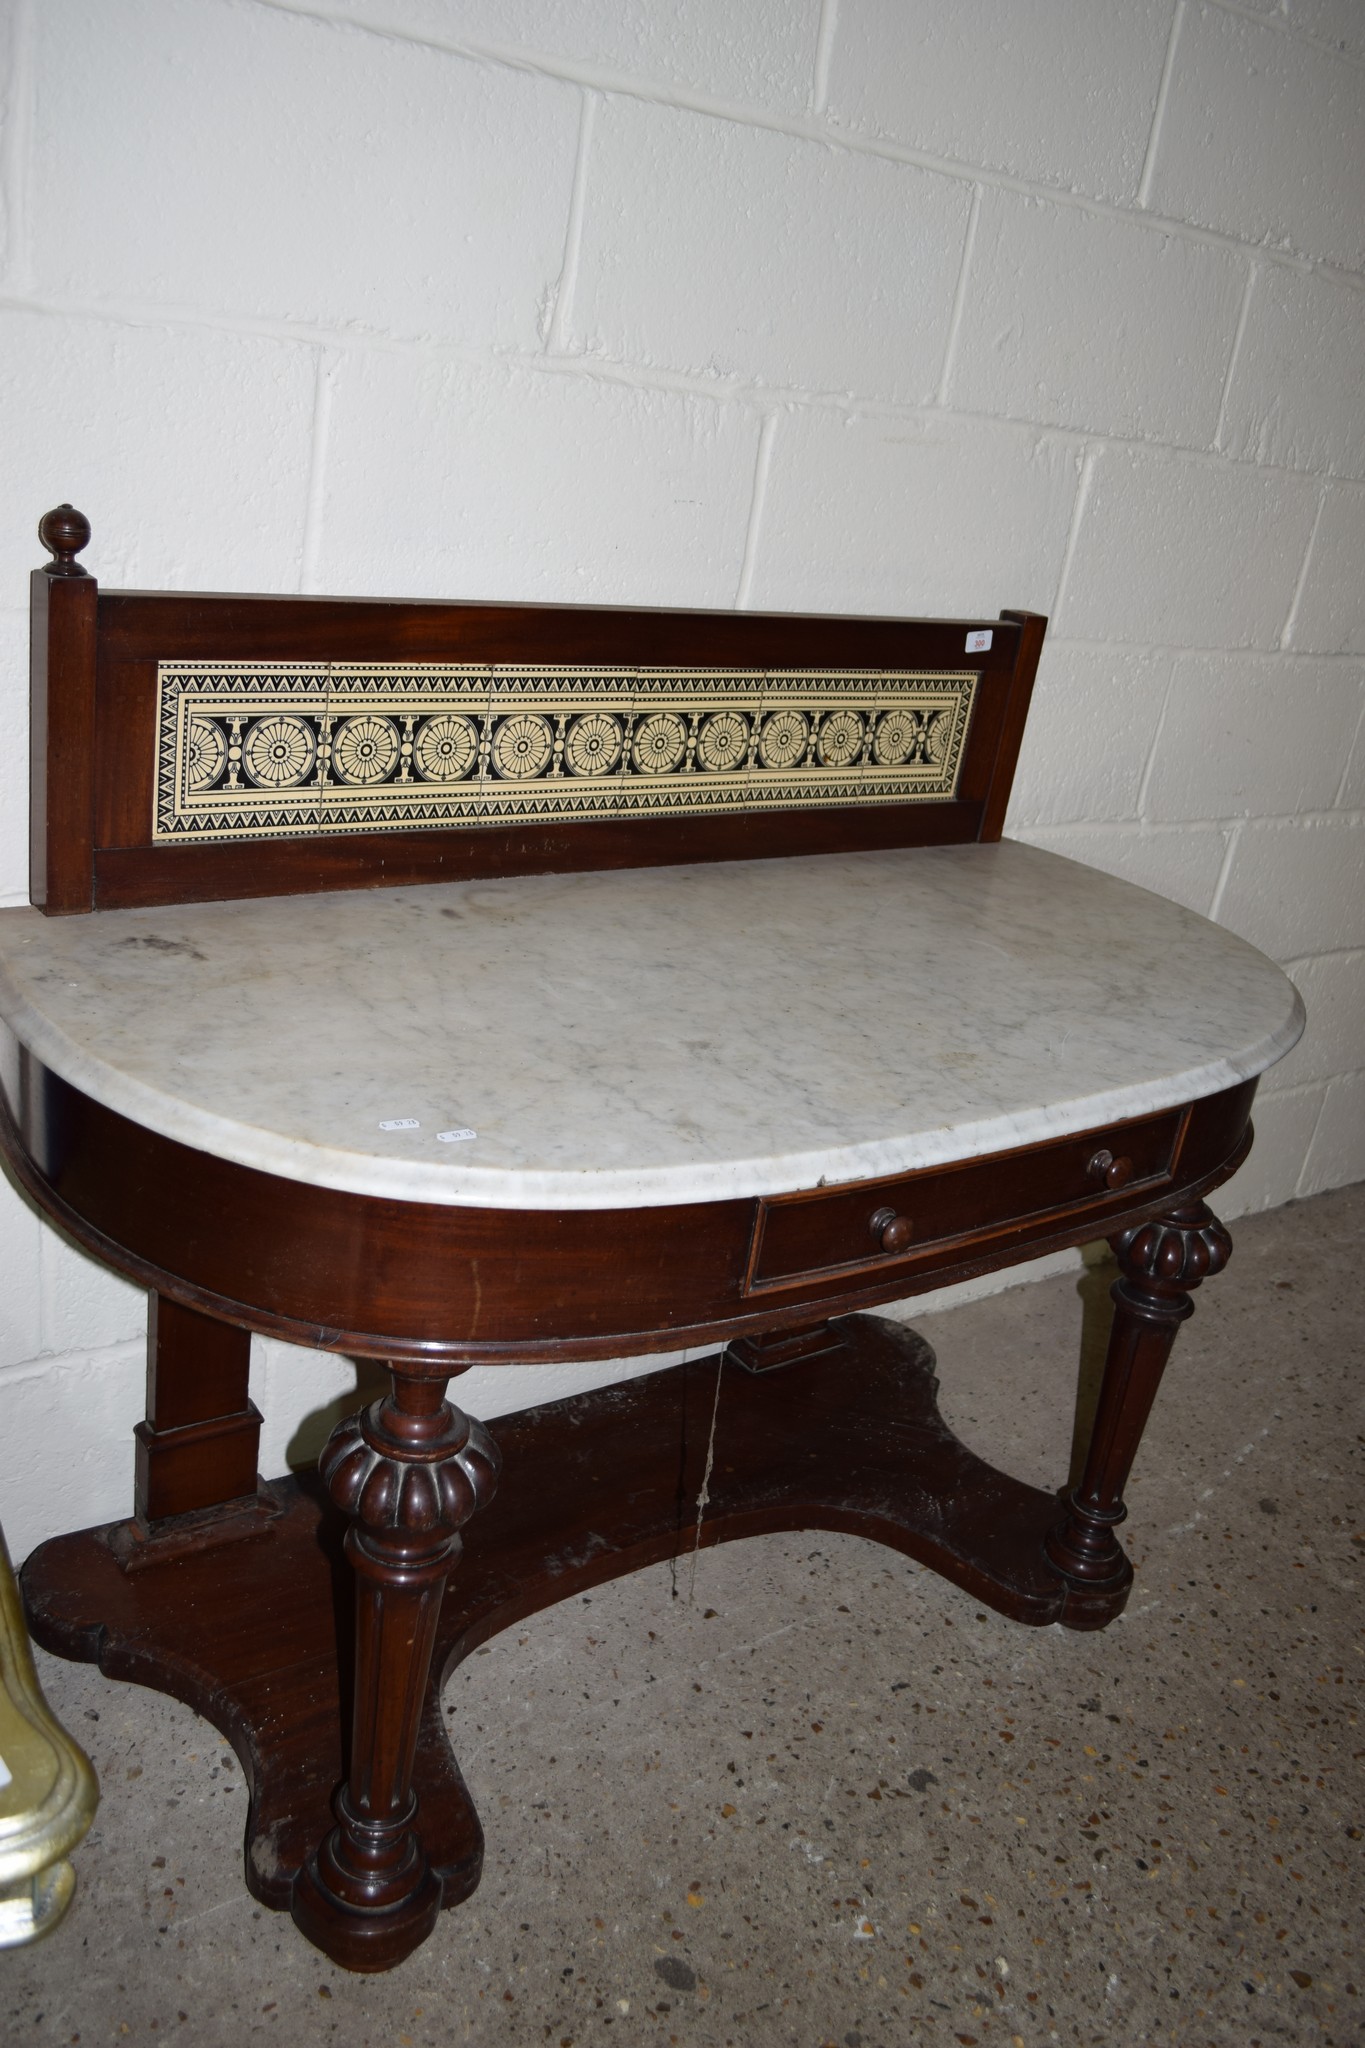 19TH CENTURY TILE BACK MARBLE TOP WASH STAND WITH ORNATELY CARVED LEGS, WIDTH APPROX 123CM MAX - Image 2 of 2